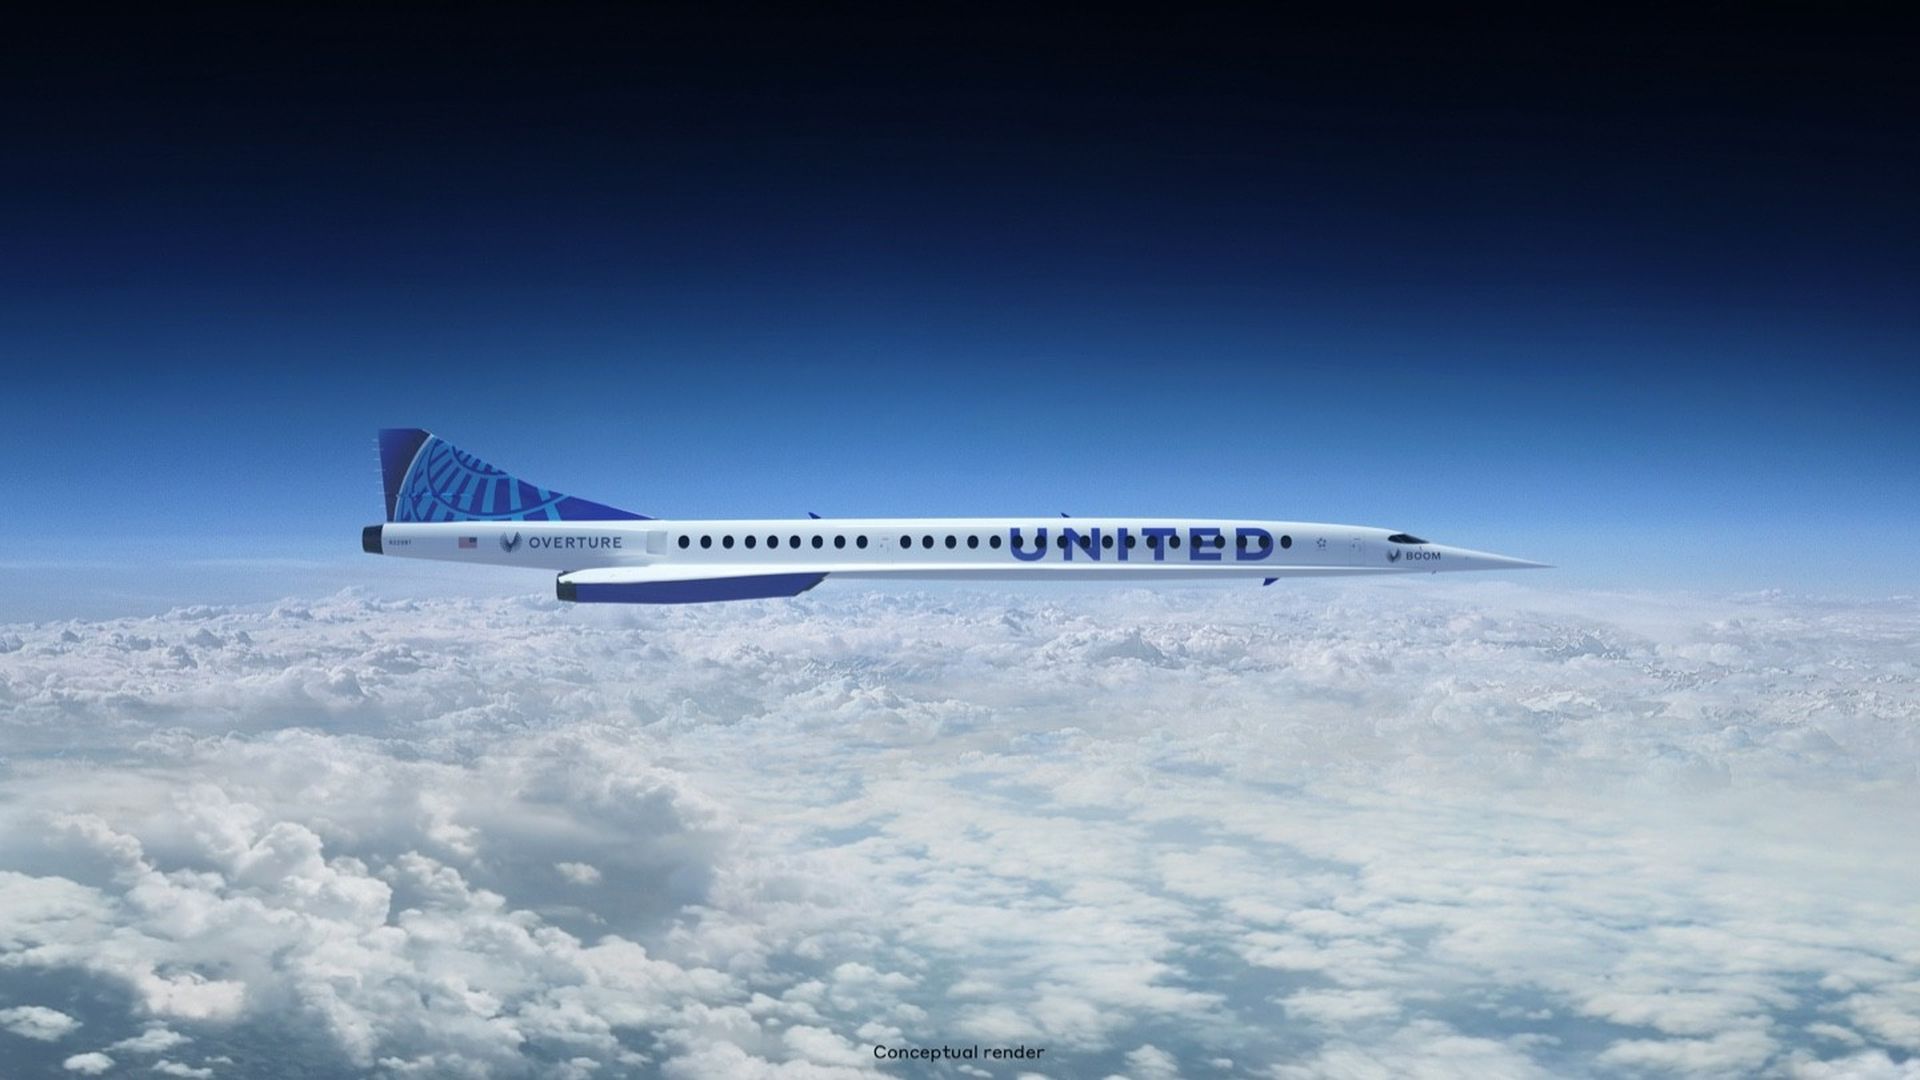 A conceptual render of Boom Supersonic's commercial supersonic jet with United Airlines livery.